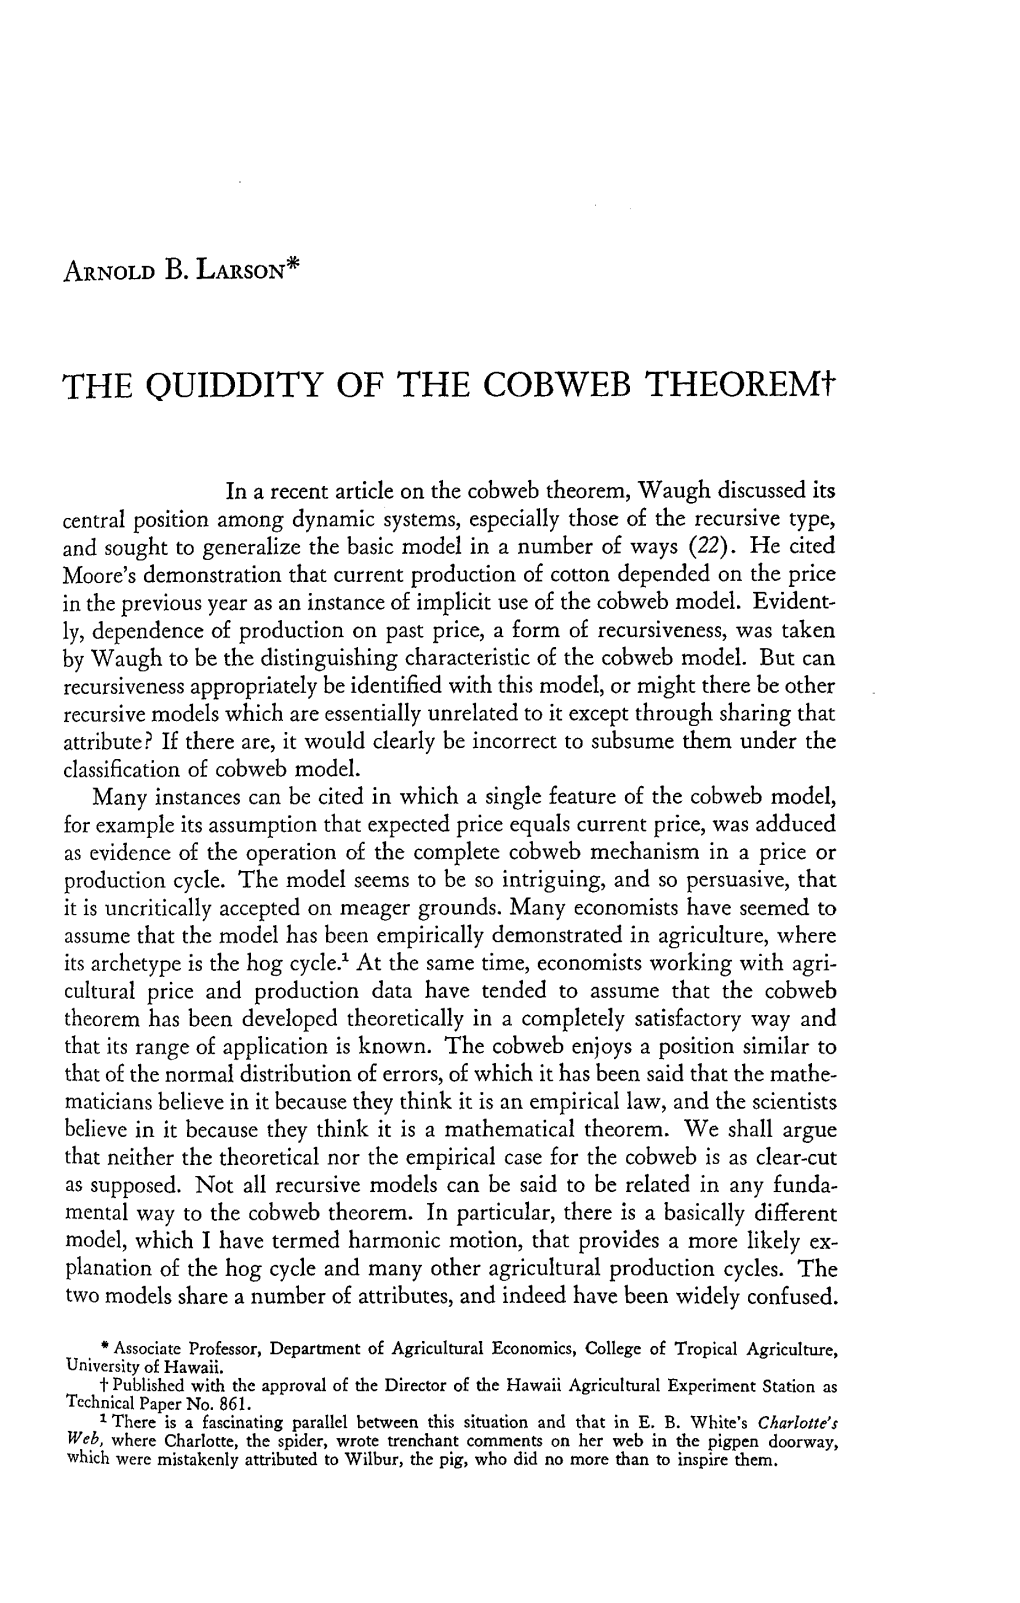 THE QUIDDITY of the COBWEB Theoremt